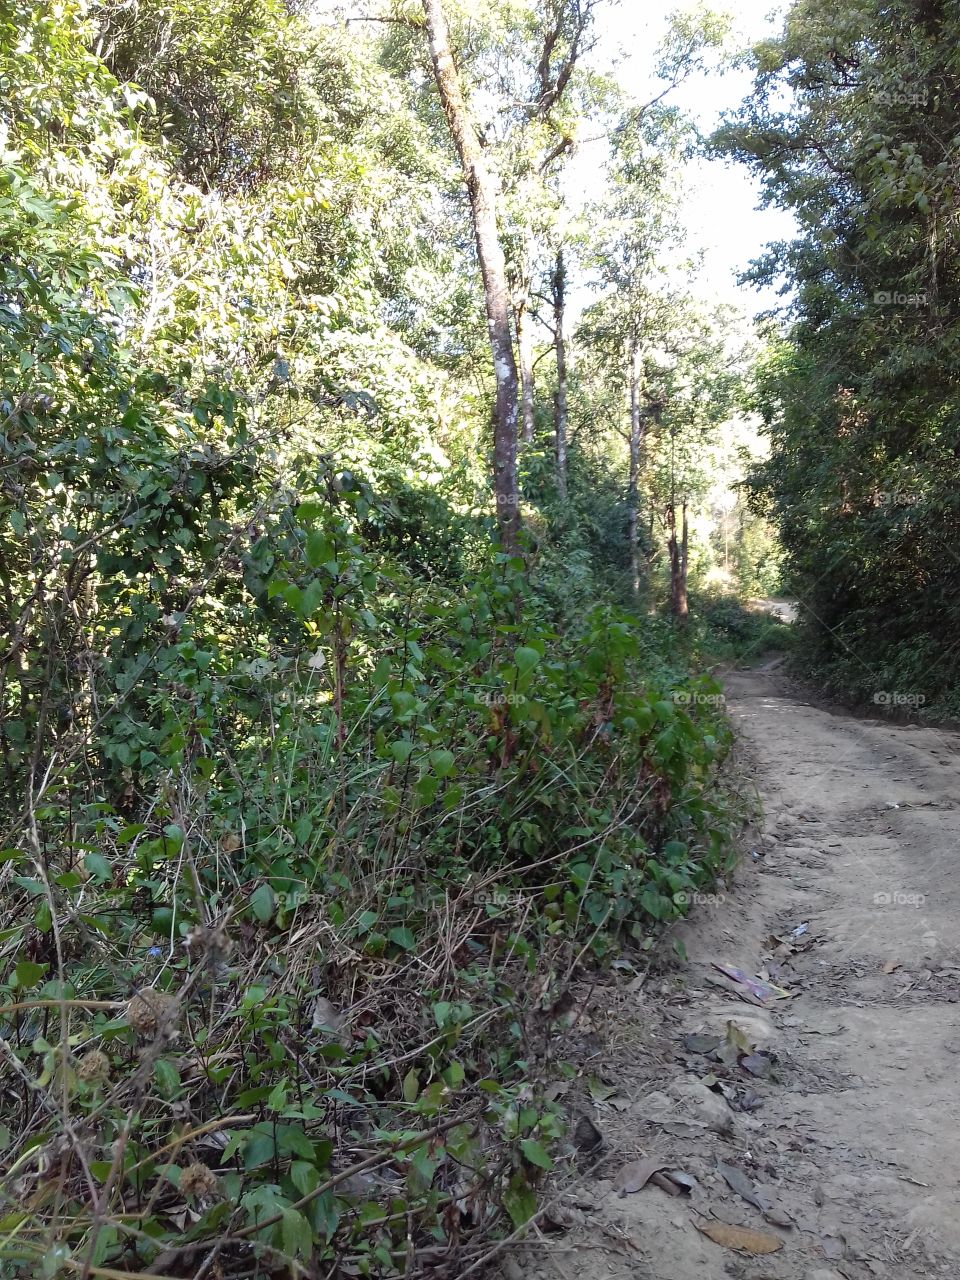 road turning in forest can bee seen far ahead as it either bends or vanishes in hillside or trees which stoood on either side